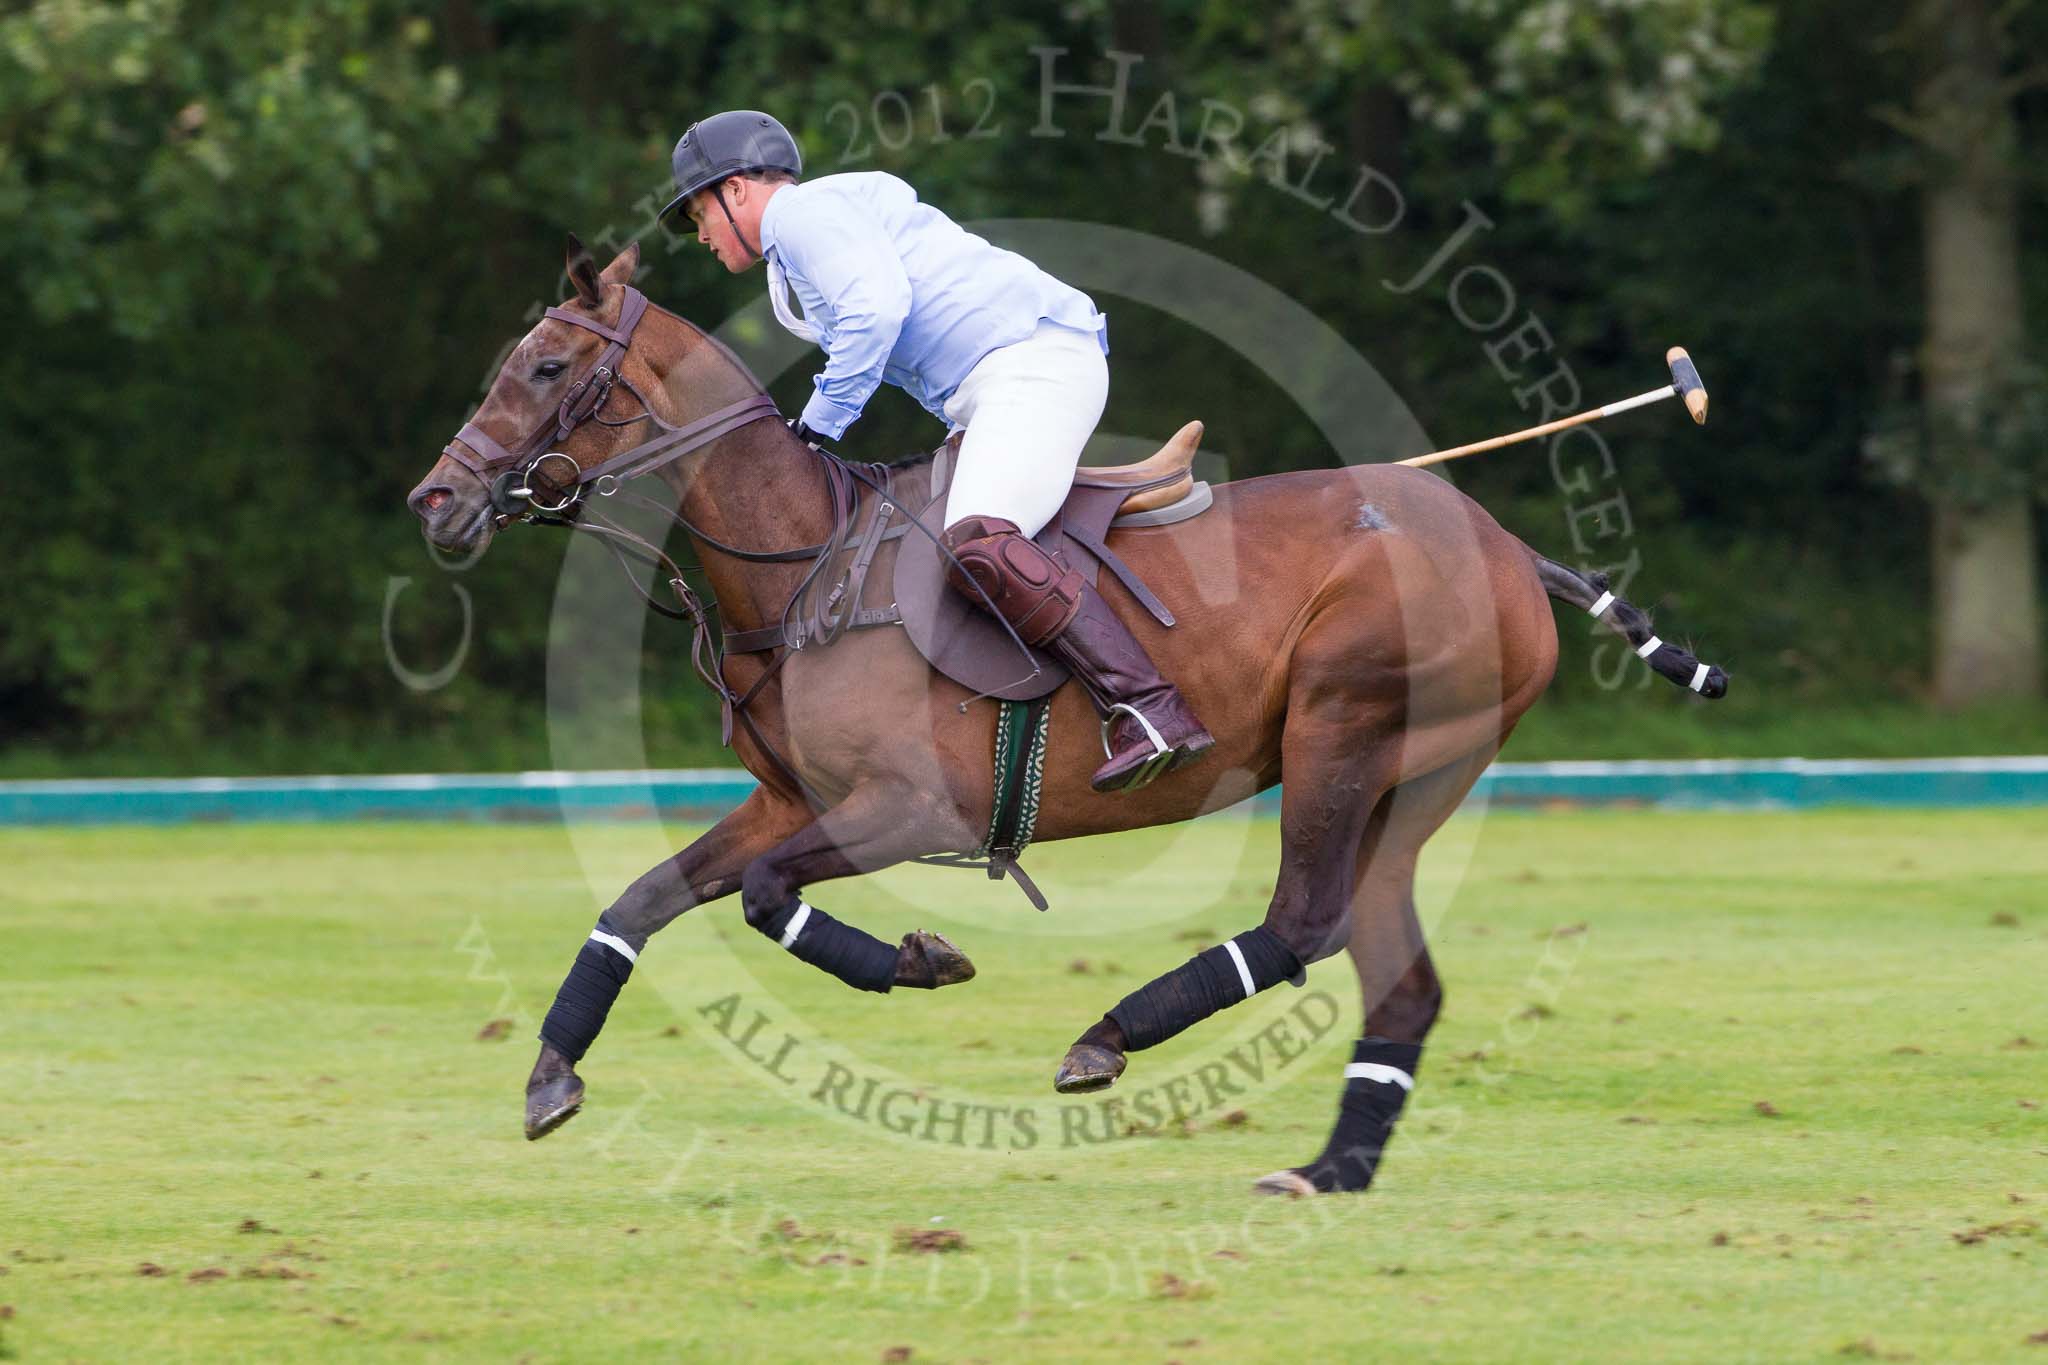 7th Heritage Polo Cup semi-finals: La Mariposa Argentina Alex Vent alone on the run..
Hurtwood Park Polo Club,
Ewhurst Green,
Surrey,
United Kingdom,
on 04 August 2012 at 15:55, image #297